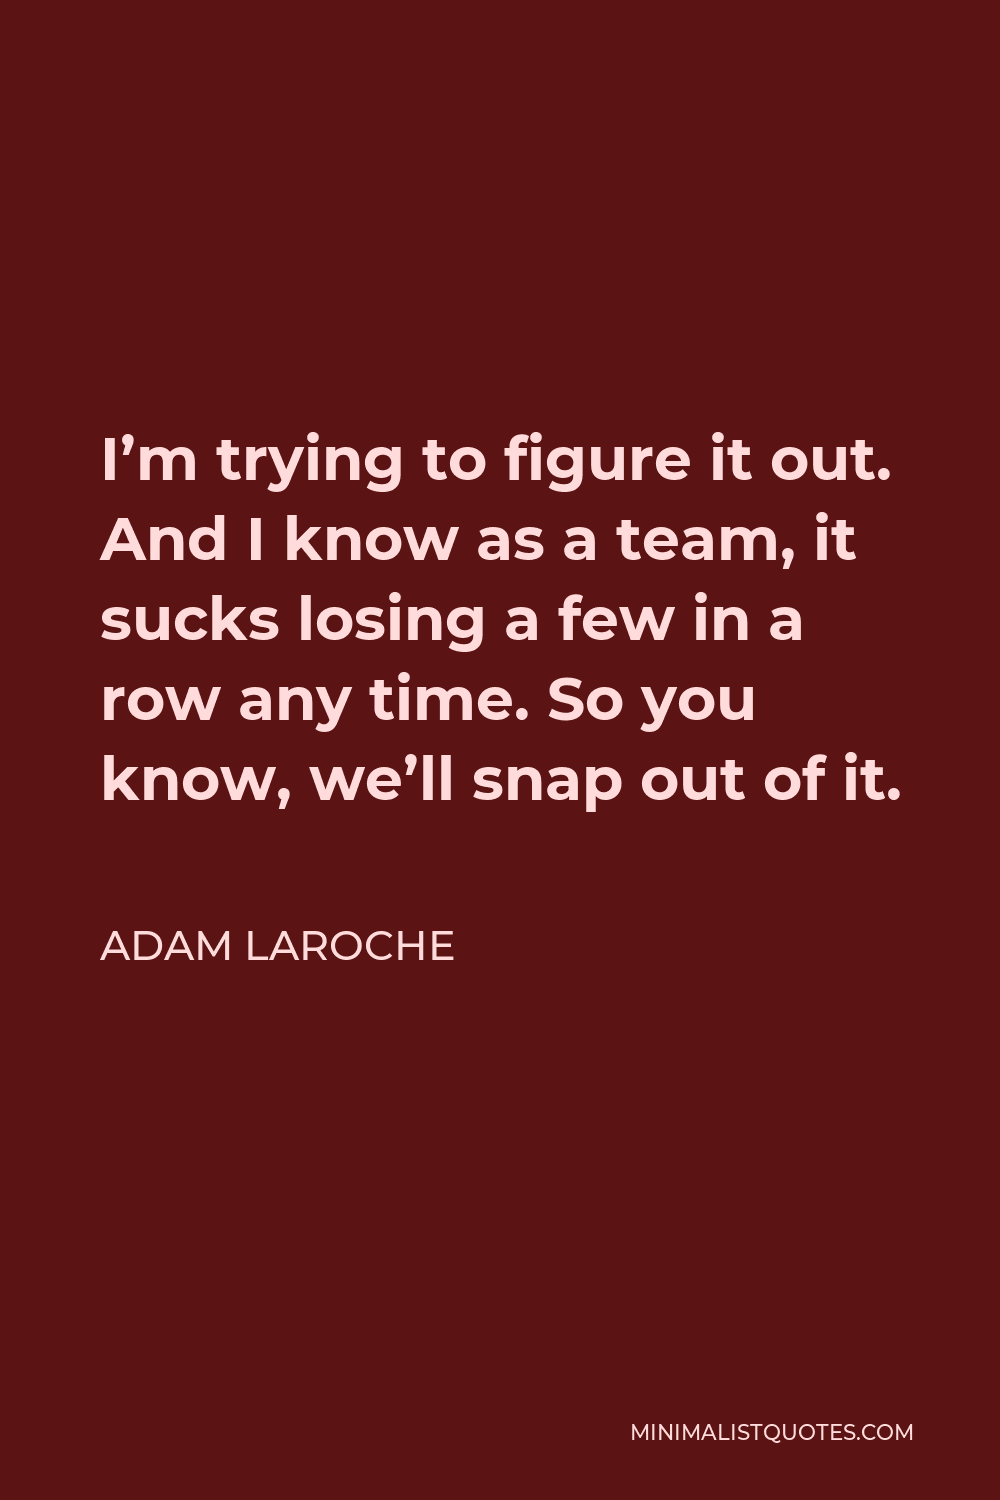 Adam LaRoche Quote - I’m trying to figure it out. And I know as a team, it sucks losing a few in a row any time. So you know, we’ll snap out of it.